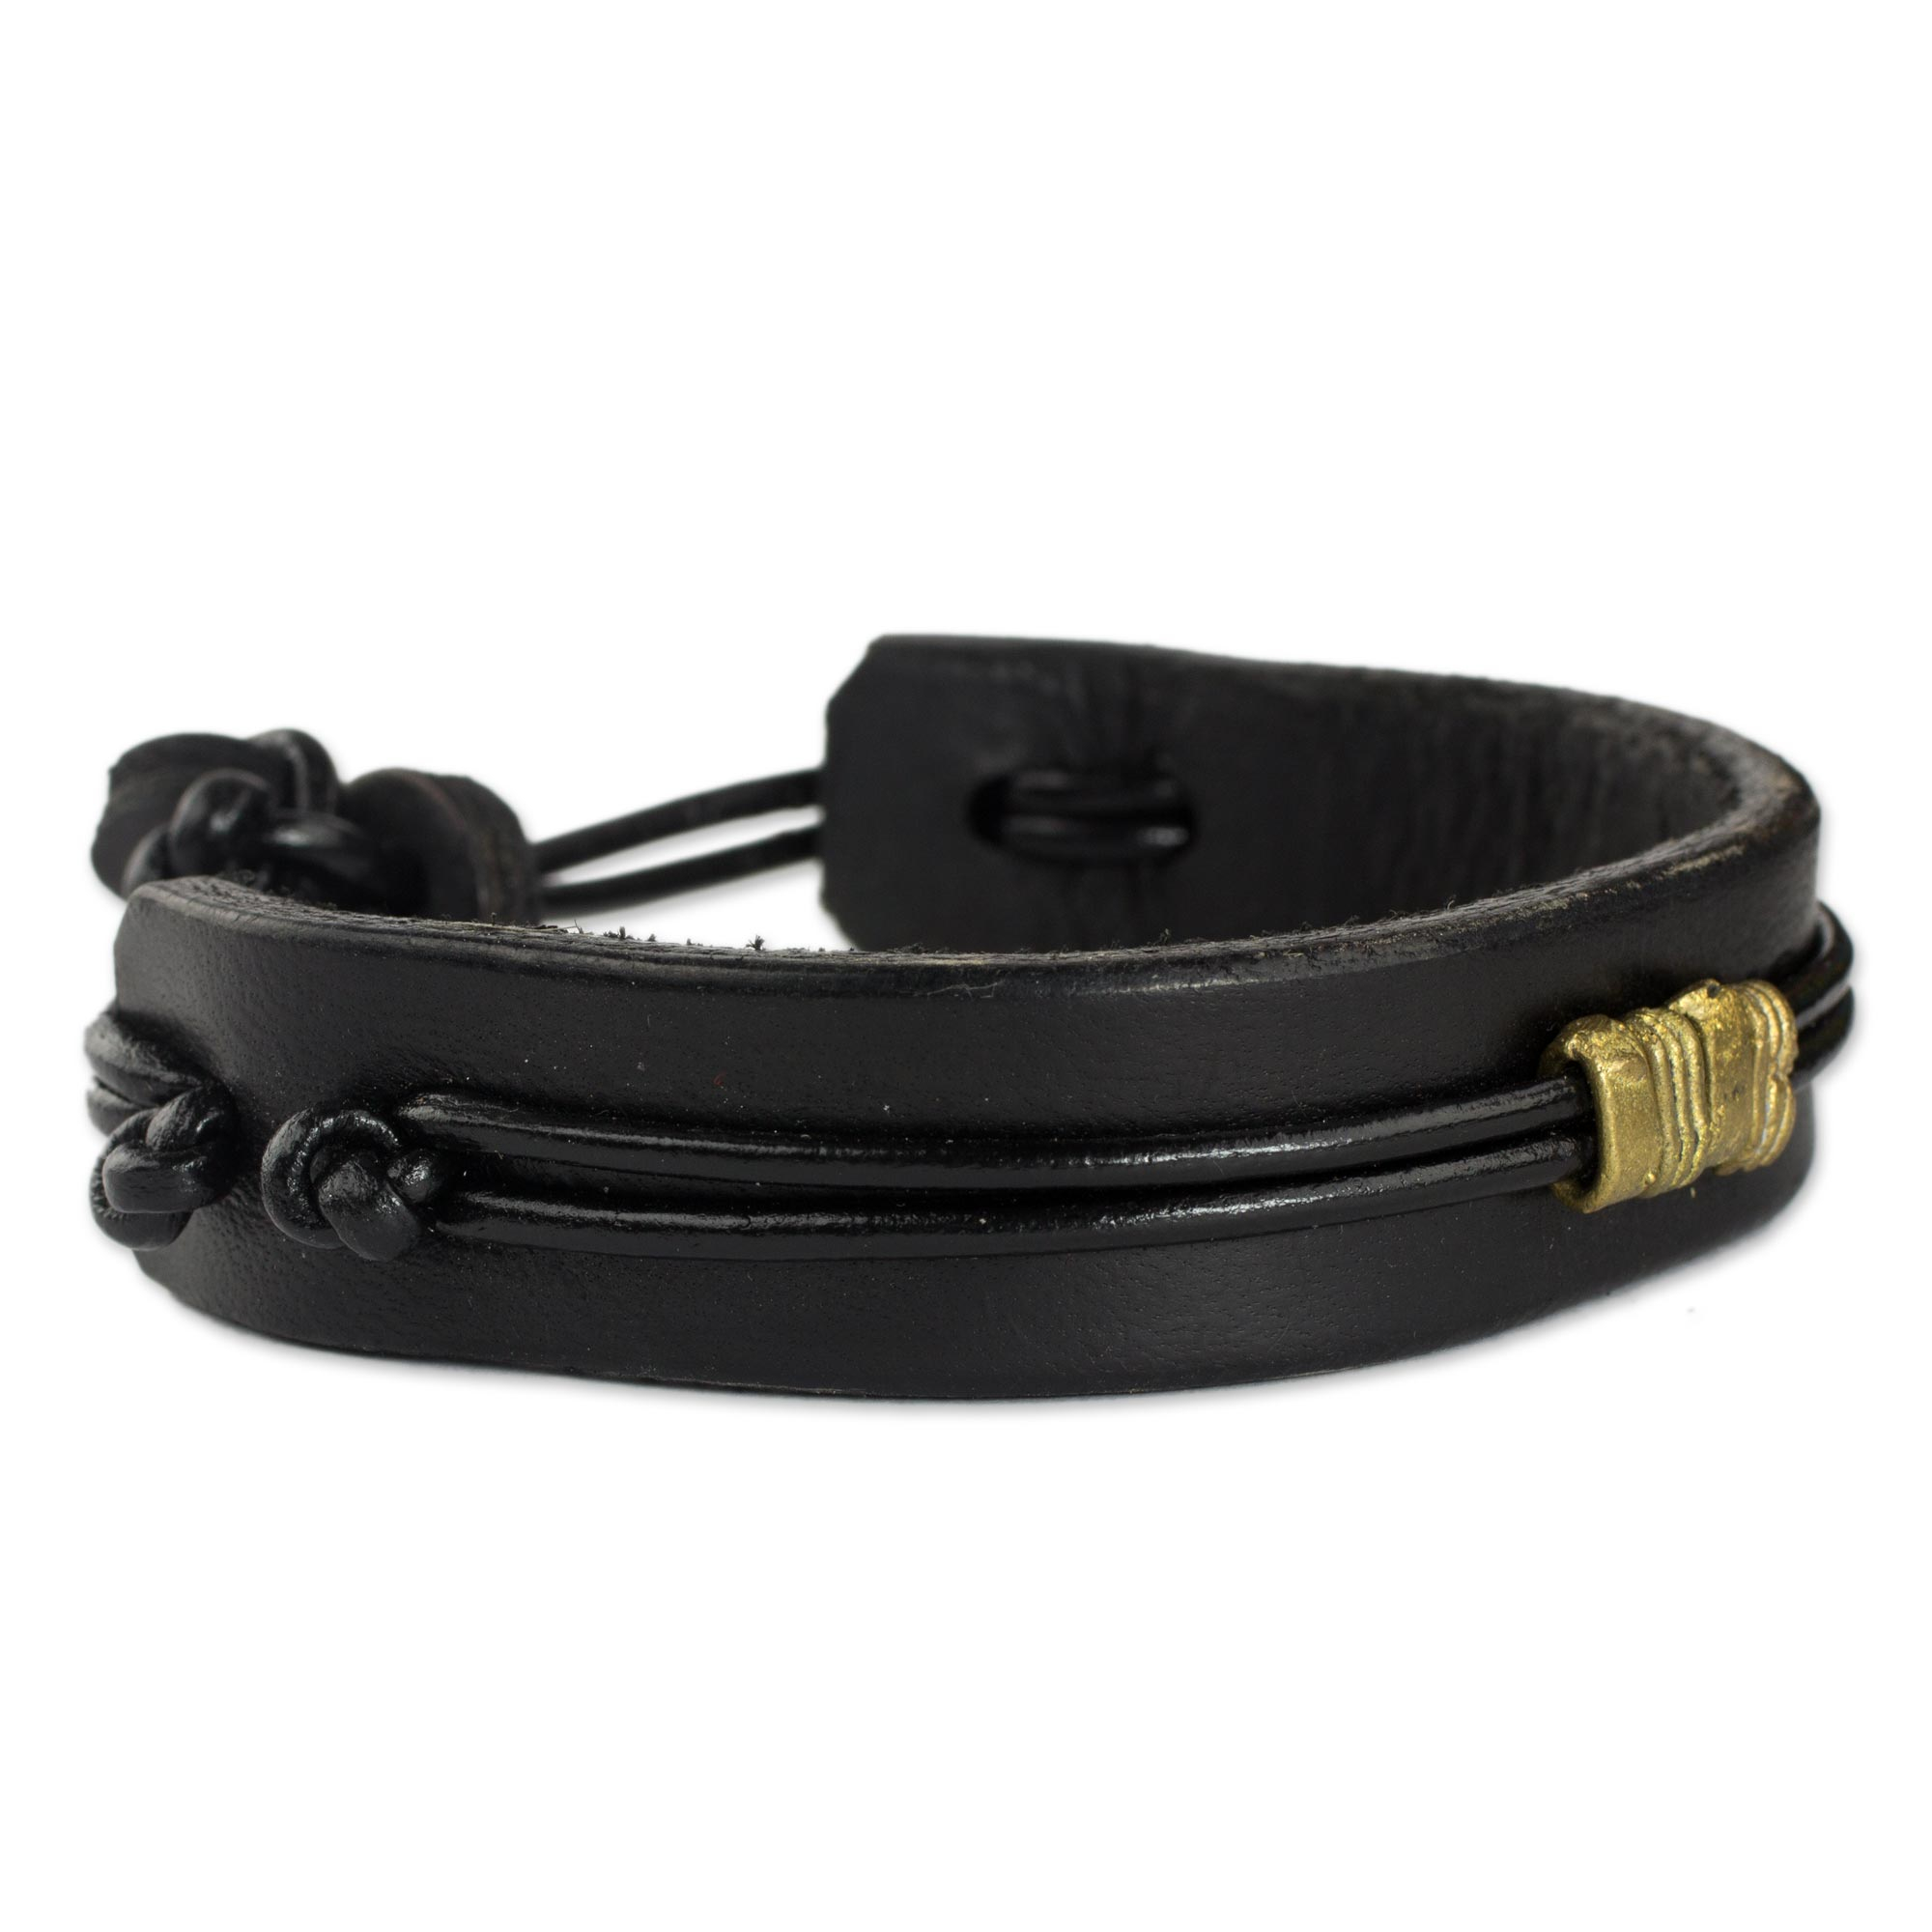 UNICEF Market | Hand Crafted Fair Trade Men's Leather Wristband ...